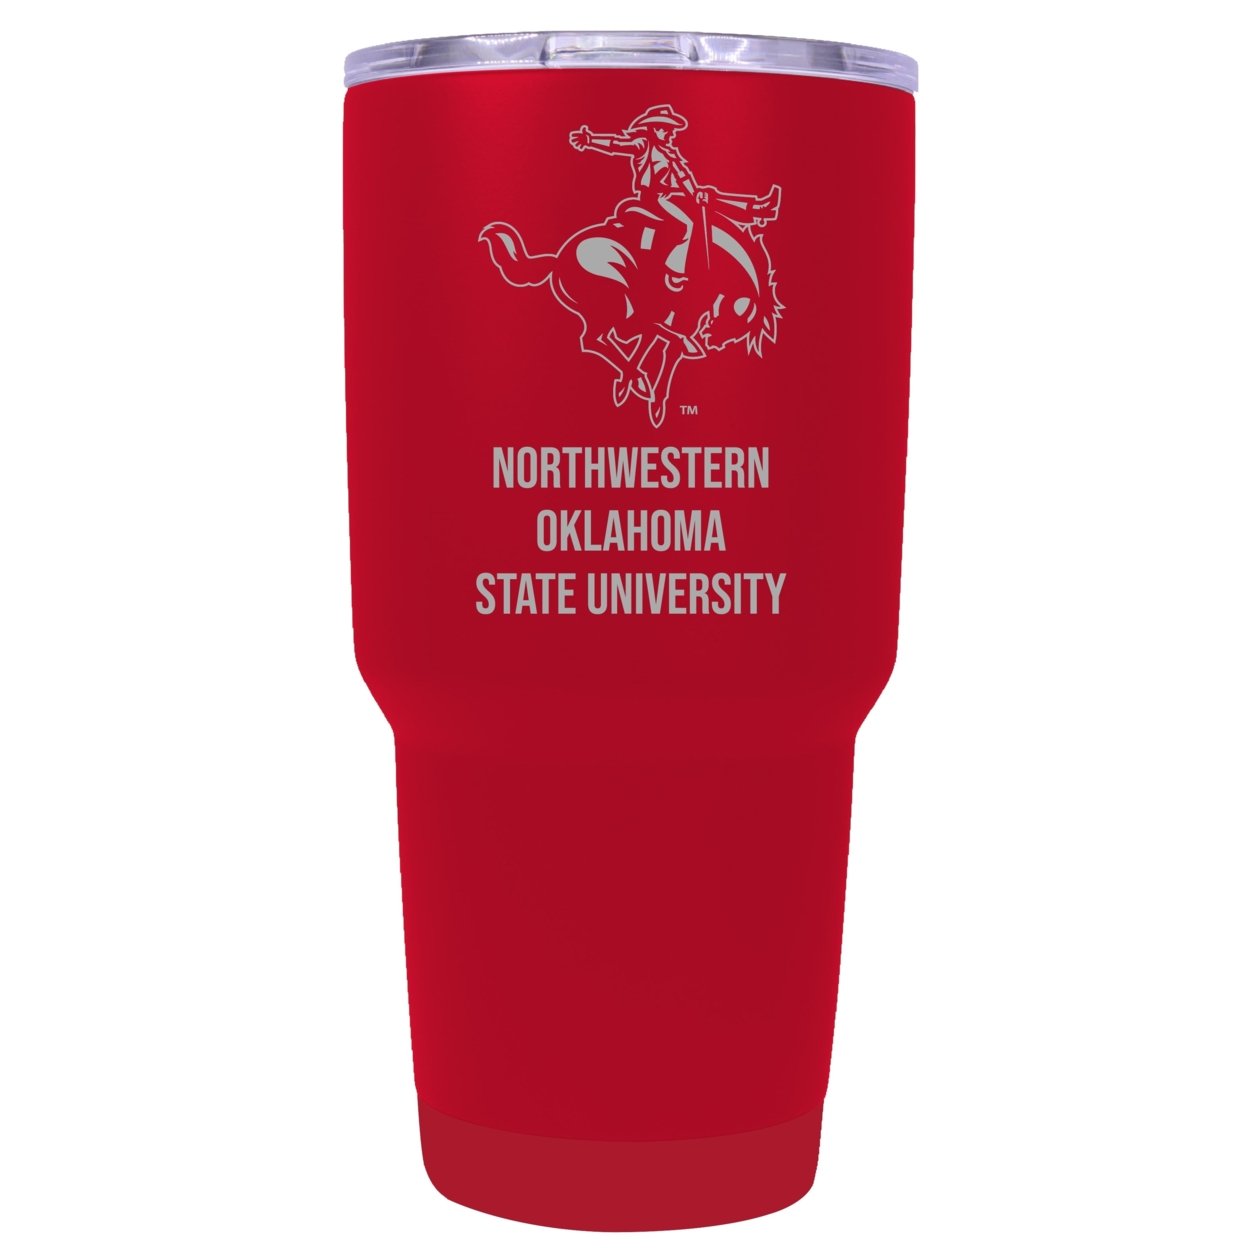 Northwestern Oklahoma State University 24 Oz Laser Engraved Stainless Steel Insulated Tumbler - Choose Your Color. - Seafoam